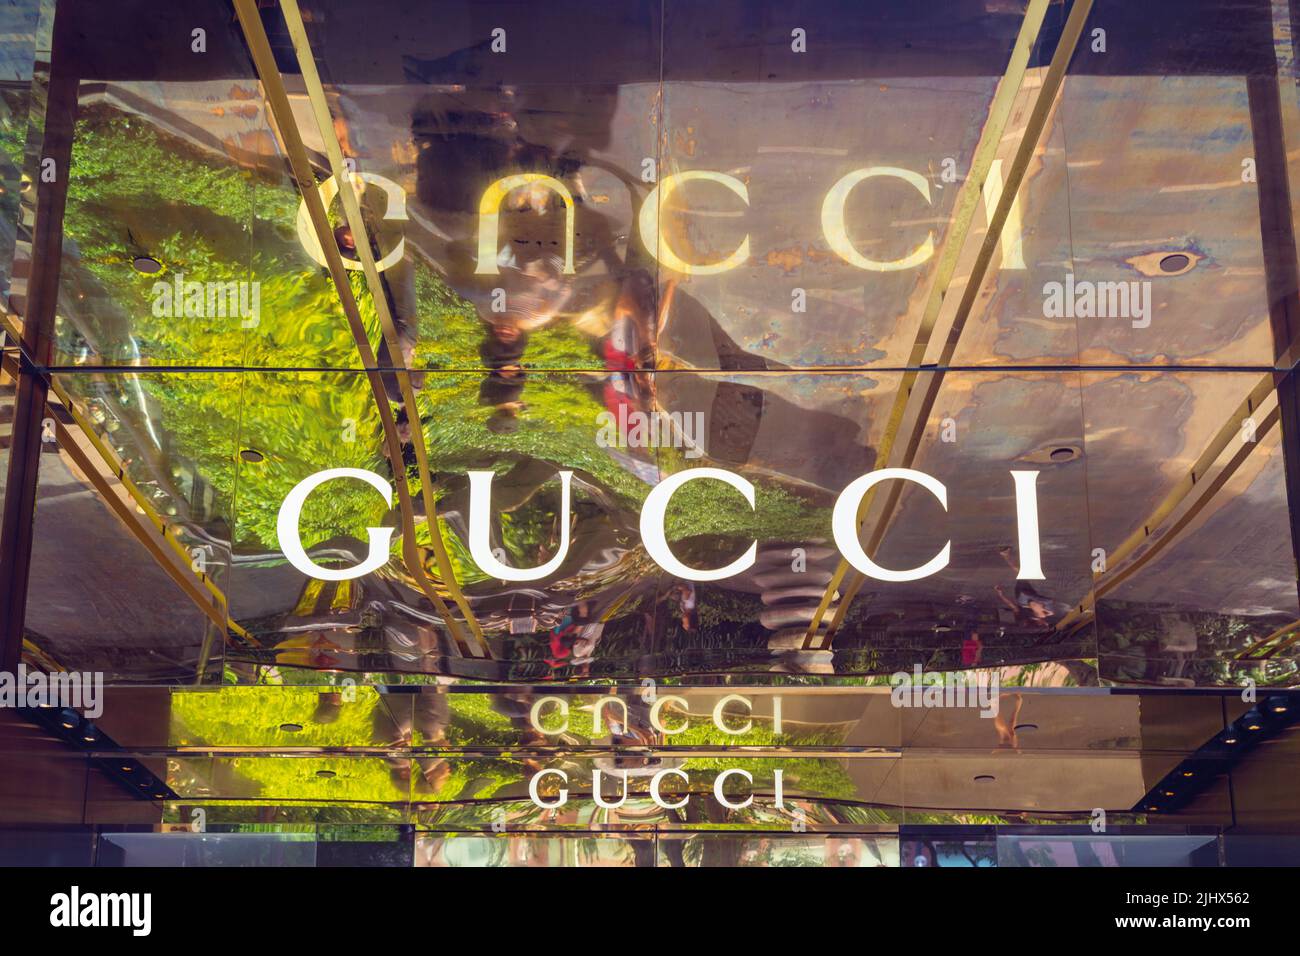 Gucci advertisement in shopping centre. Republic of Singapore Stock Photo